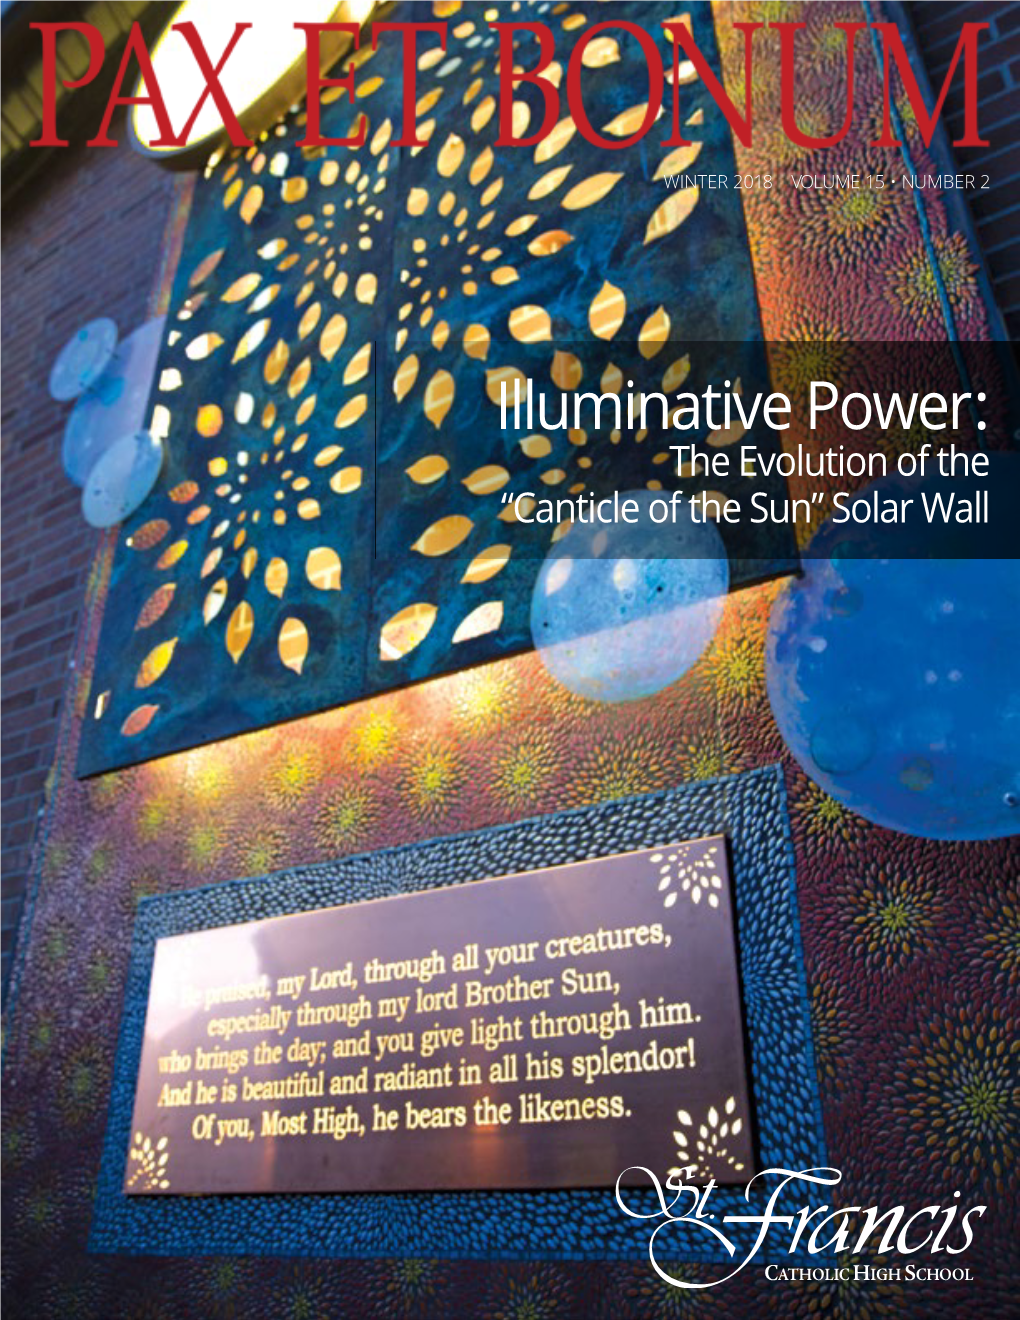 Illuminative Power: the Evolution of the “Canticle of the Sun” Solar Wall in THIS ISSUE